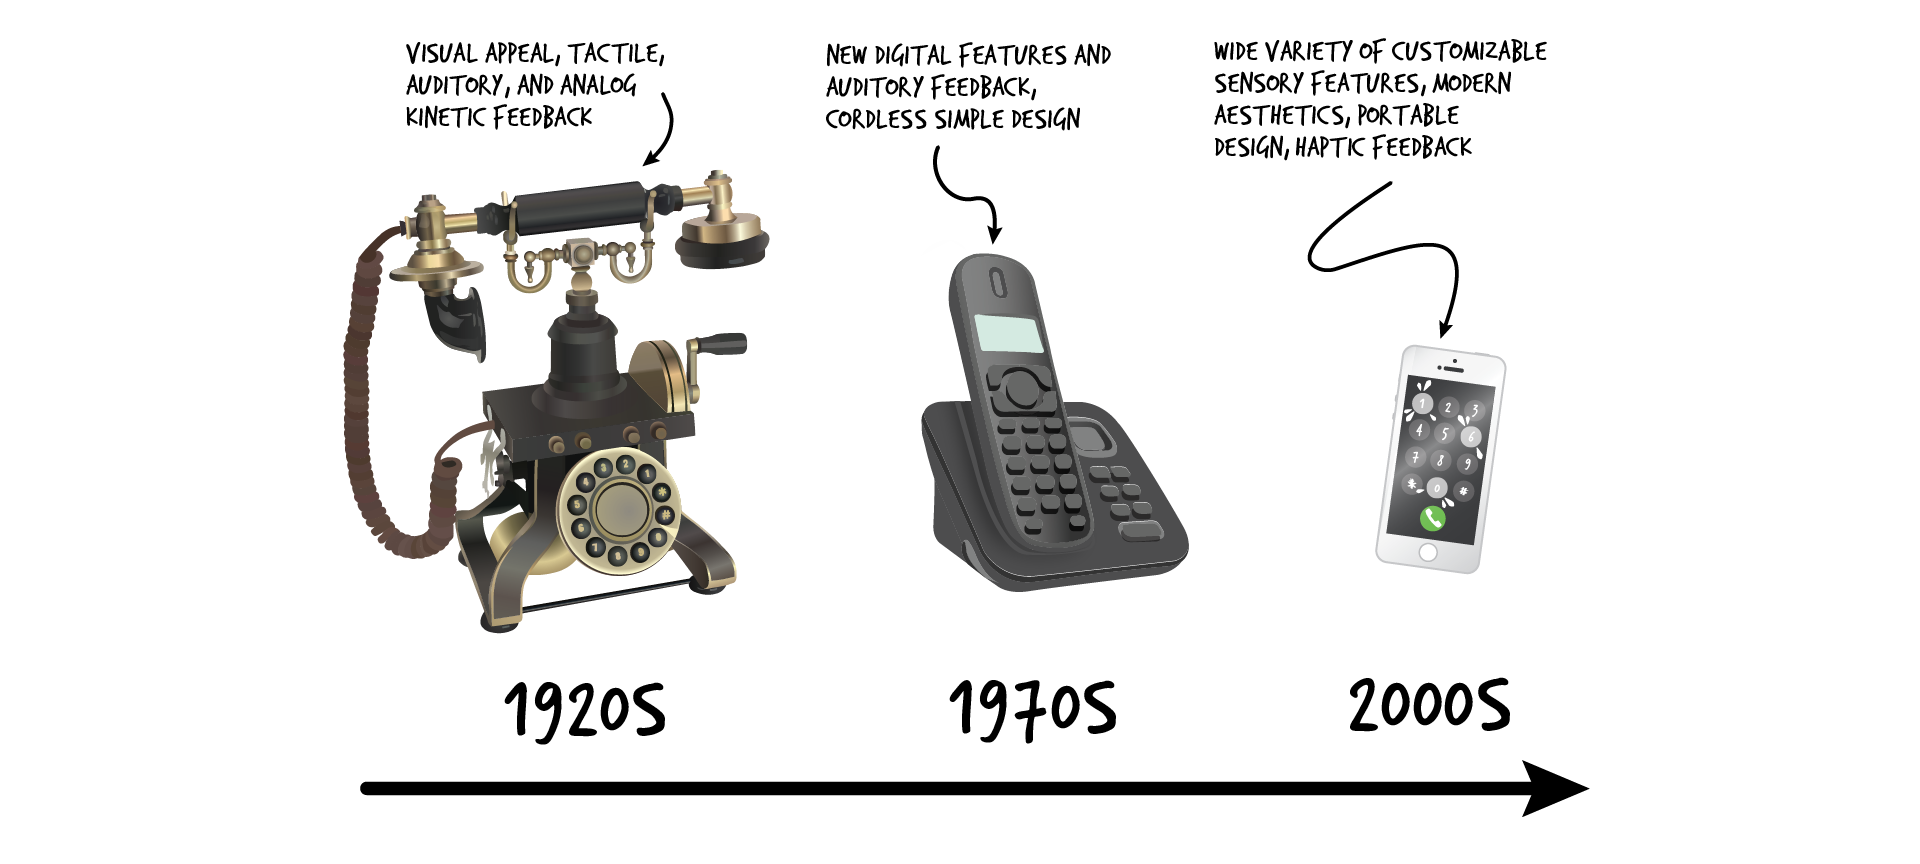 A timeline shows the evolution of a phone with 3 examples. On the bottom, a black arrow points to the right with the text: 1920s on the left, 1970s in the middle, and 2000s on the right. Above 1920s is a black and gold vintage rotary phone with the following text above the phone. Visual appeal, tactile, auditory, and analog kinetic feedback. Above 1970s is a black landline phone with the following text. New digital features and auditory feedback, cordless simple design. Above 2000s is a white smart phone with following text. Wide variety of customizable sensory features, modern aesthetics, portable design, haptic feedback.